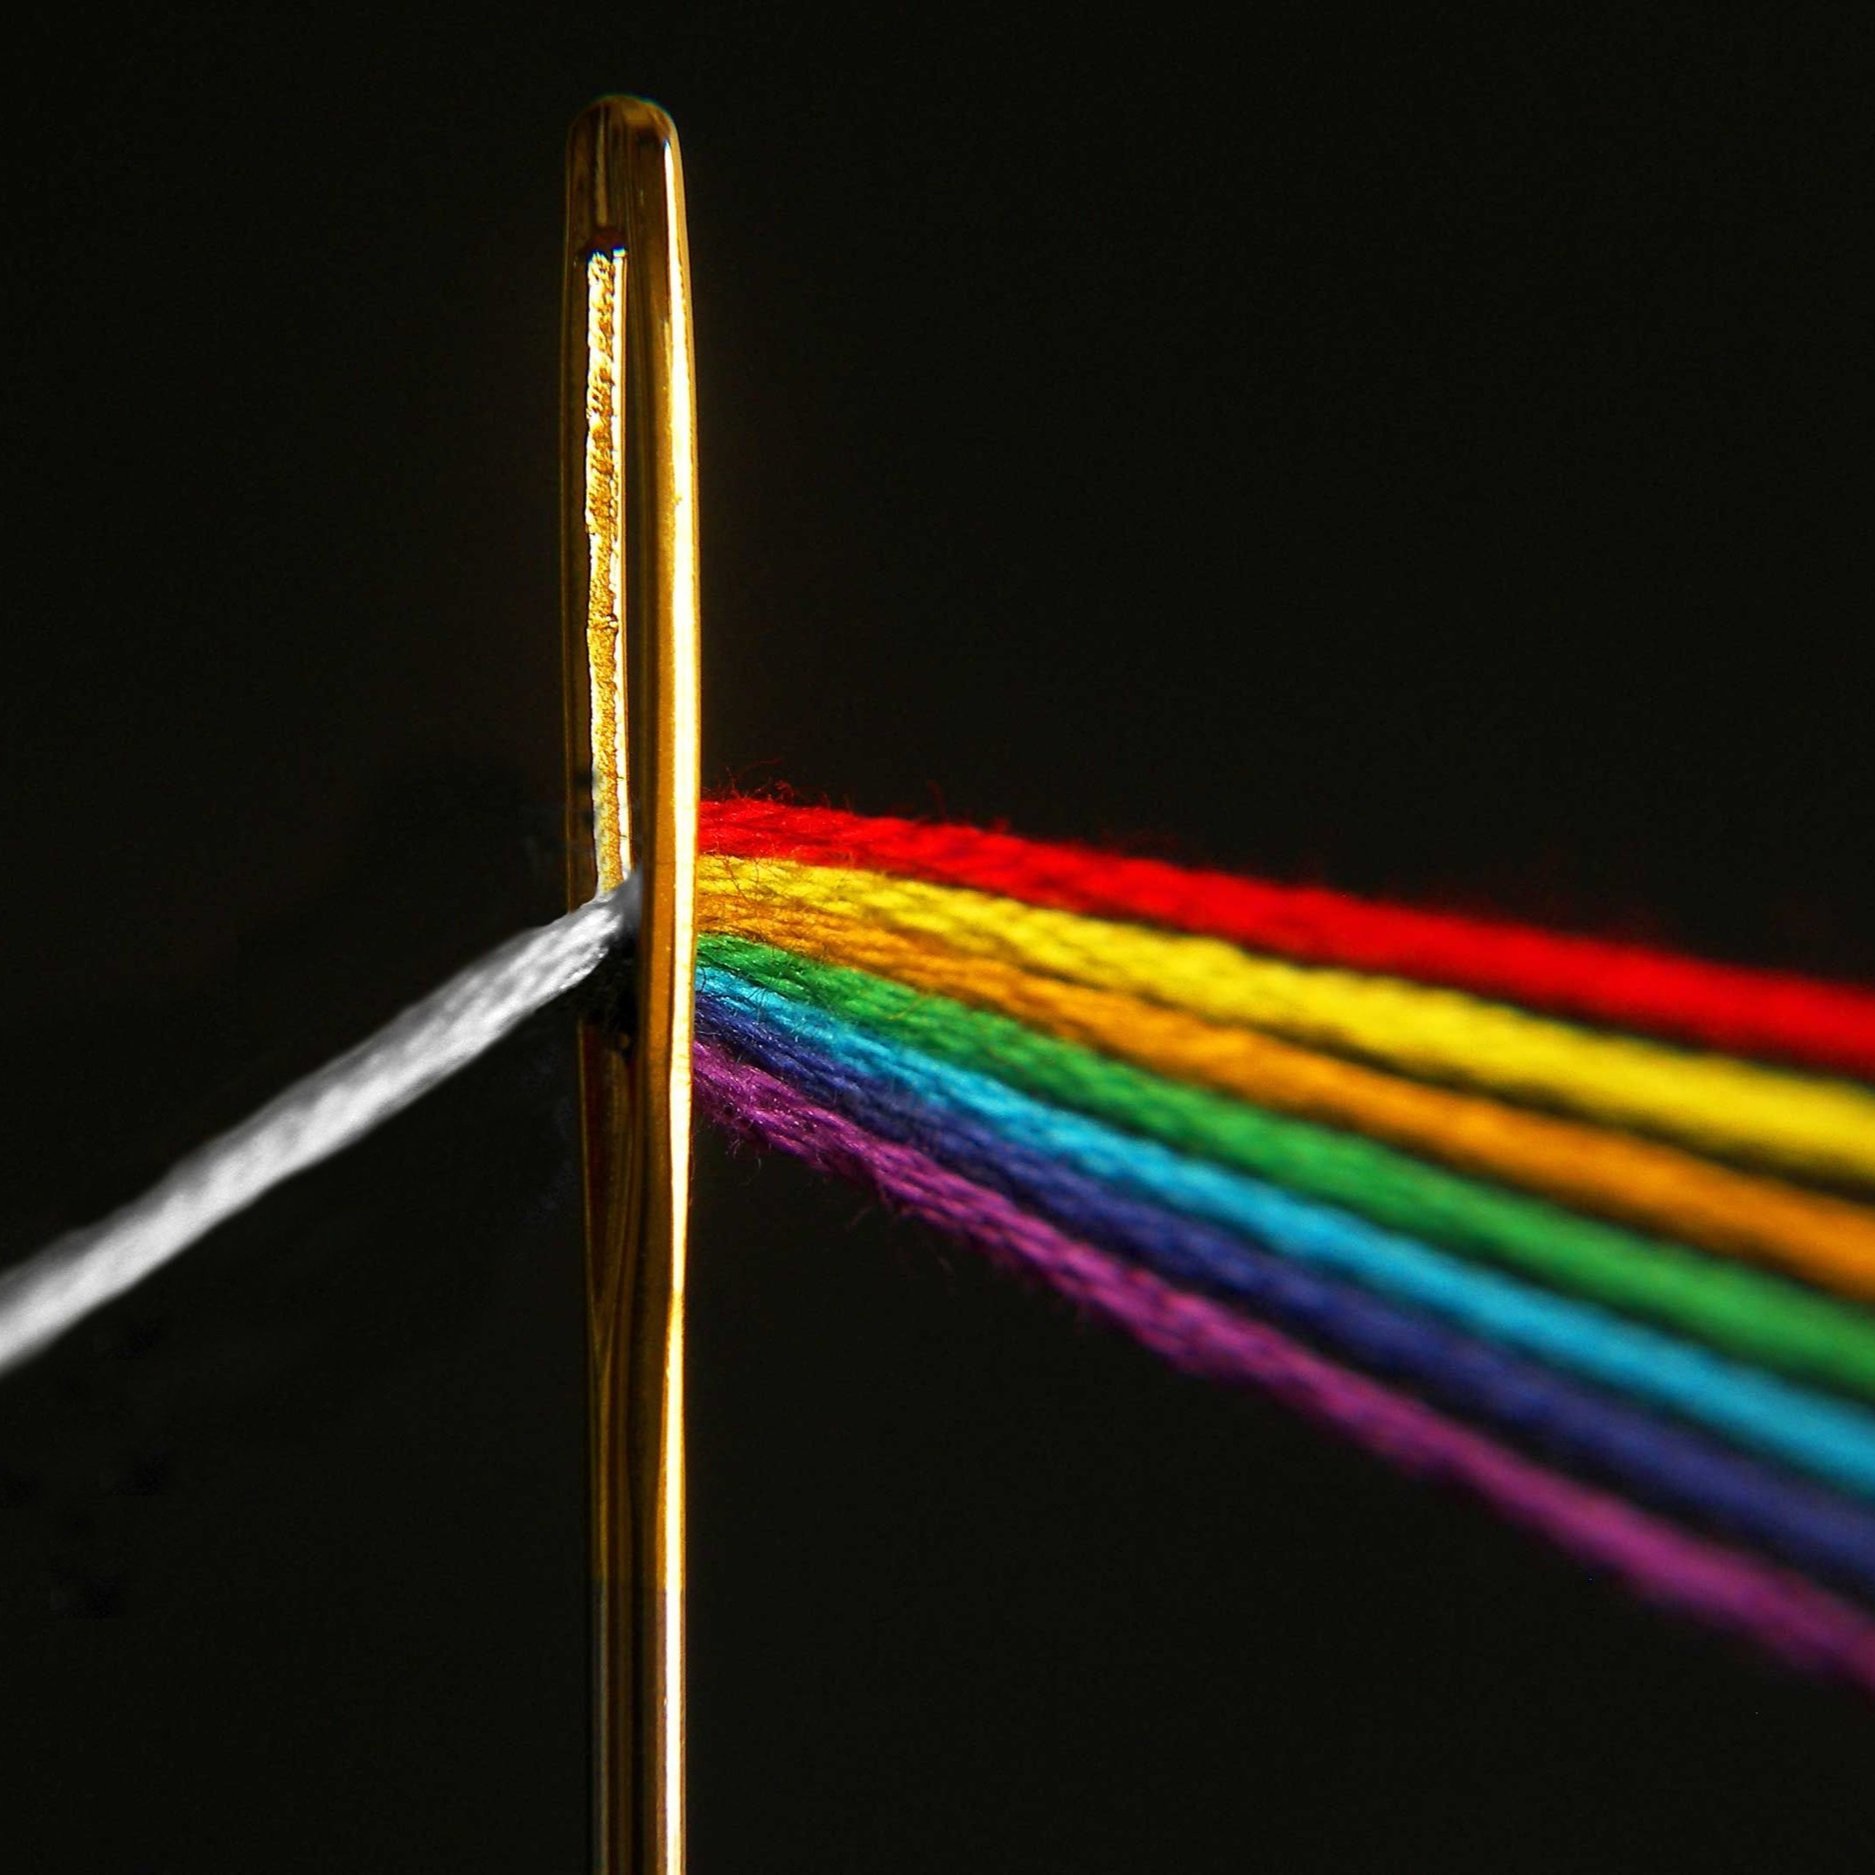 Refraction of light on a prism